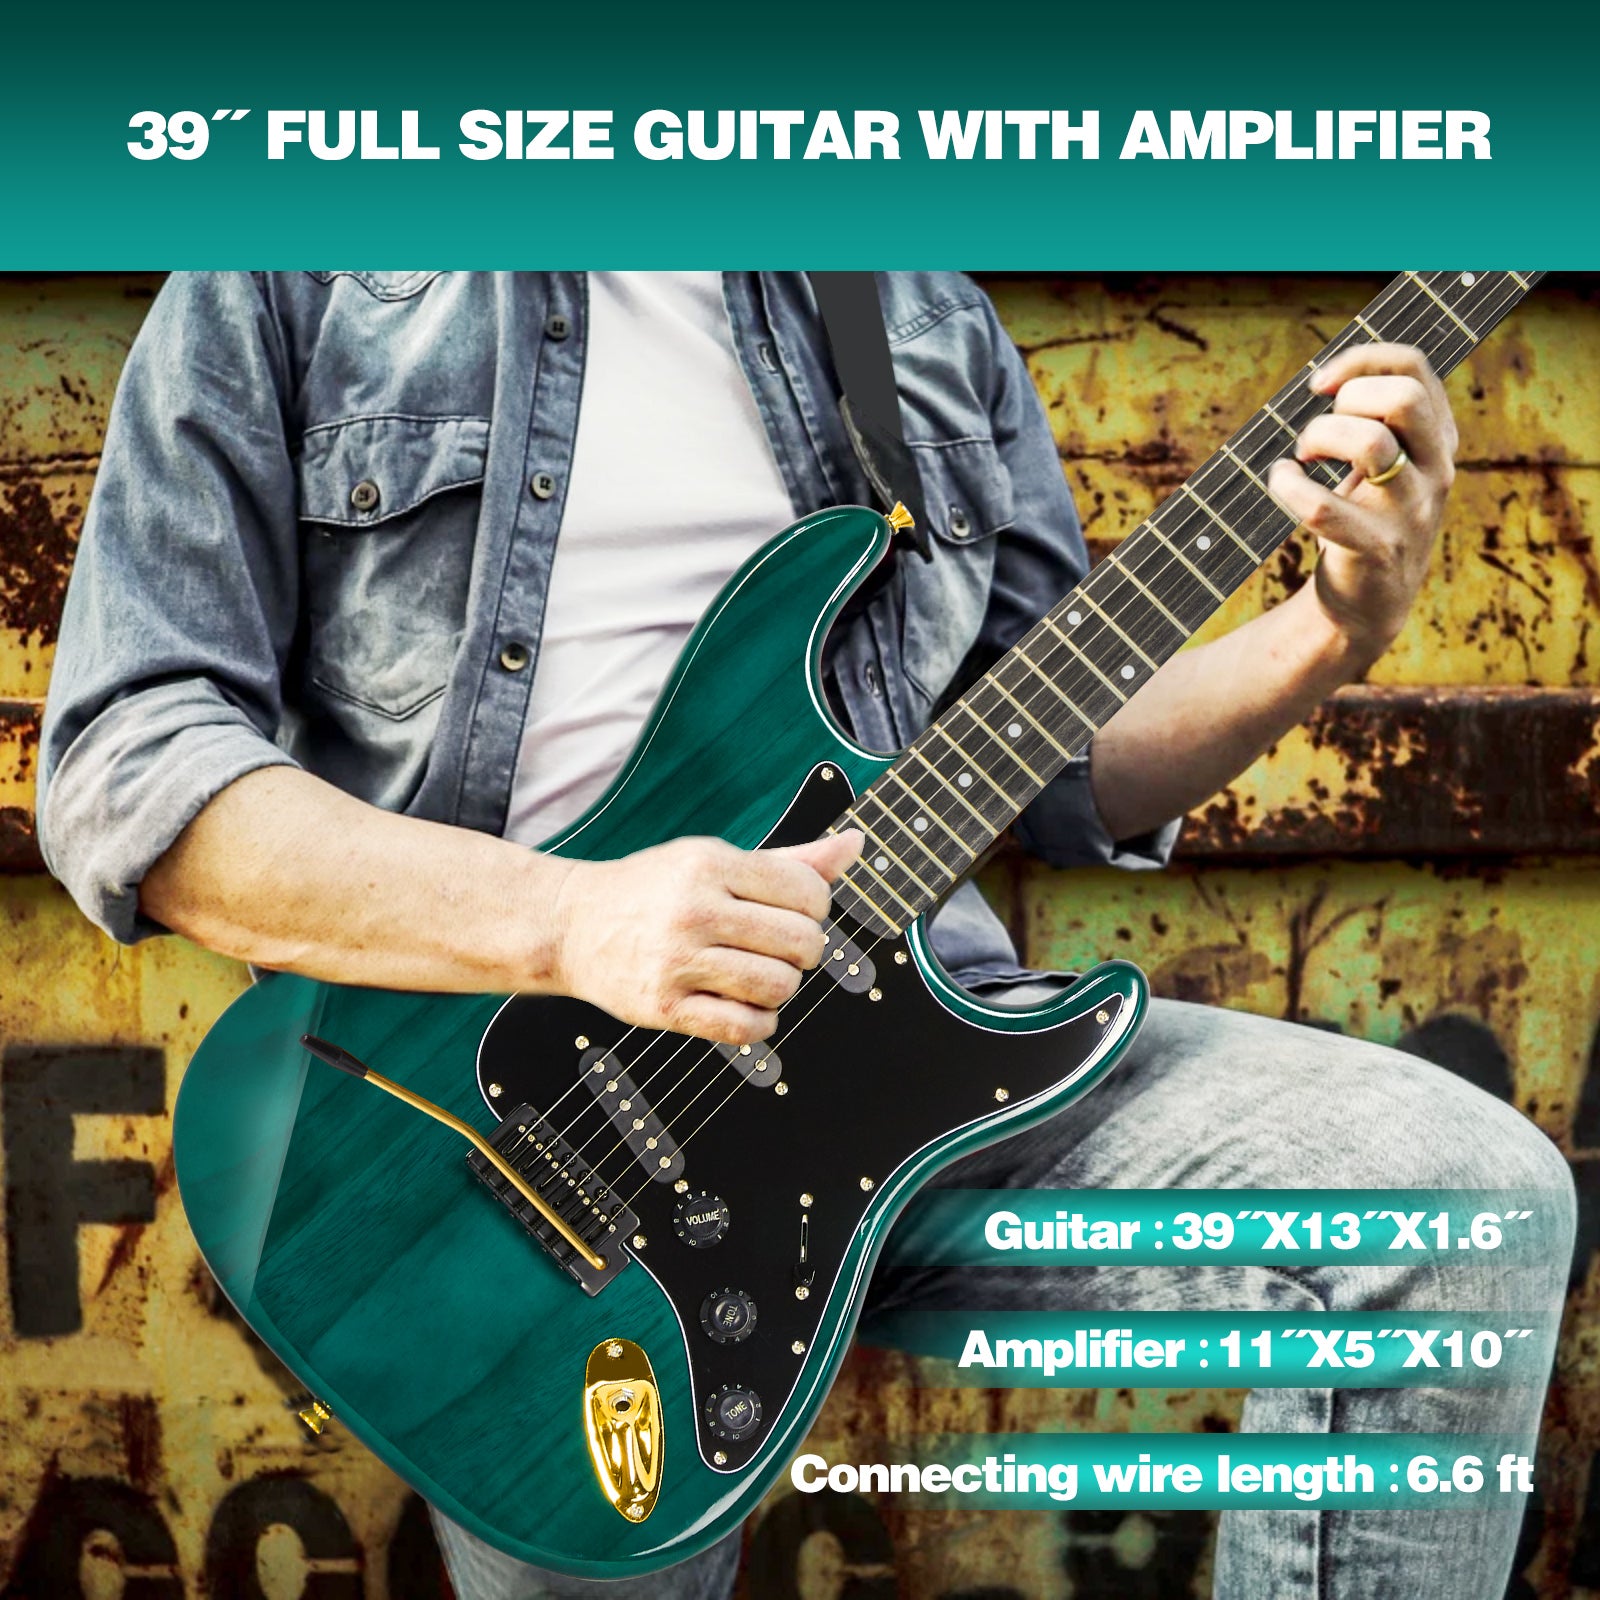 MUSTAR MEG-100, Electric Guitar Kit with 25W Amplifier, Solid Wood Electric Guitar Kits Beginner(Ripple Green)